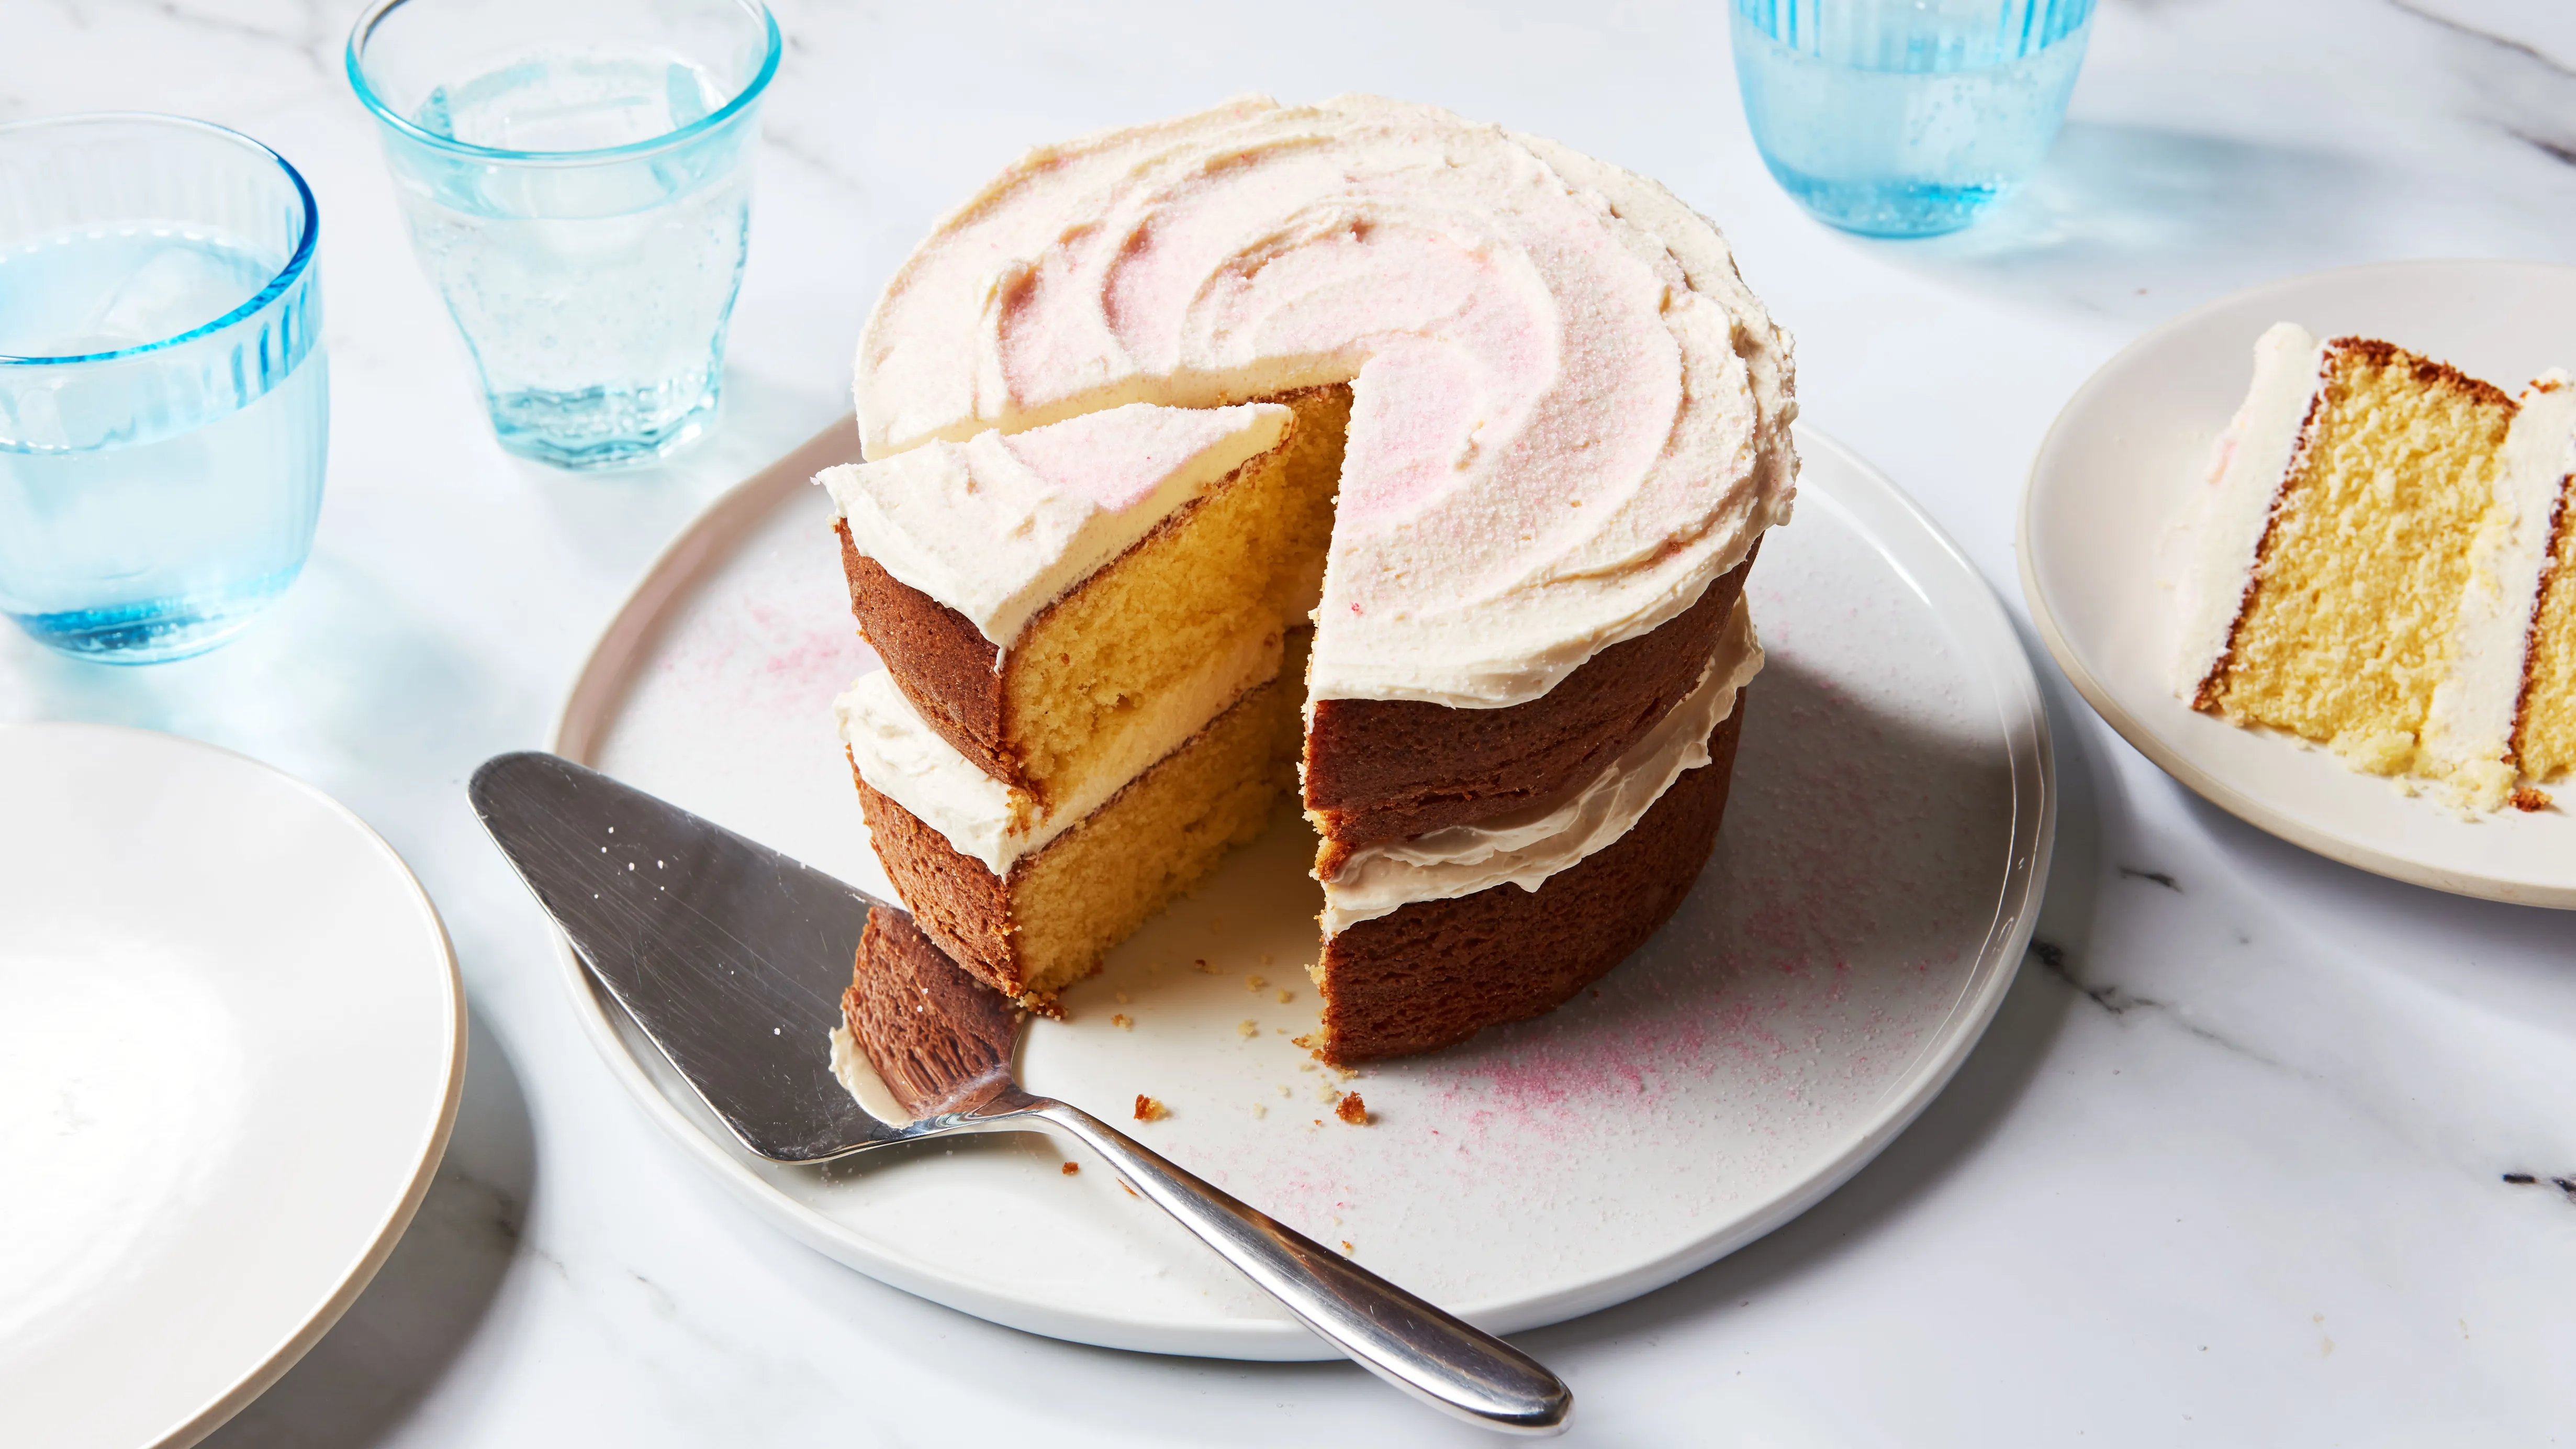 how-to-bake-a-design-into-the-middle-of-a-cake